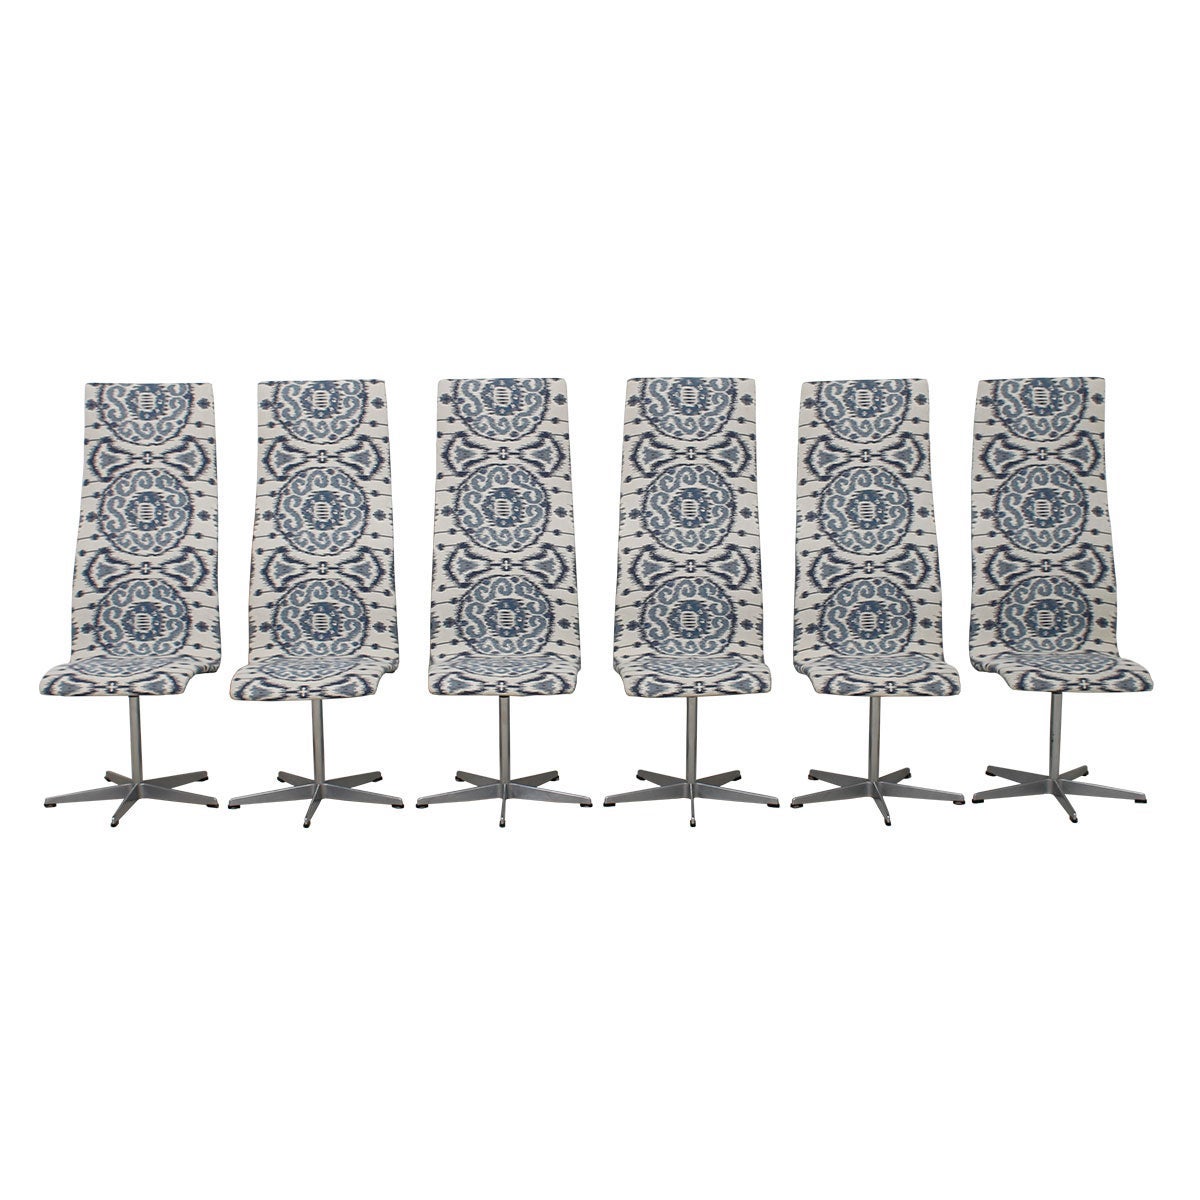 Set of 6 Vintage Fritz Hansen Oxford Chairs in New Blue & White Ikat Upholstery For Sale